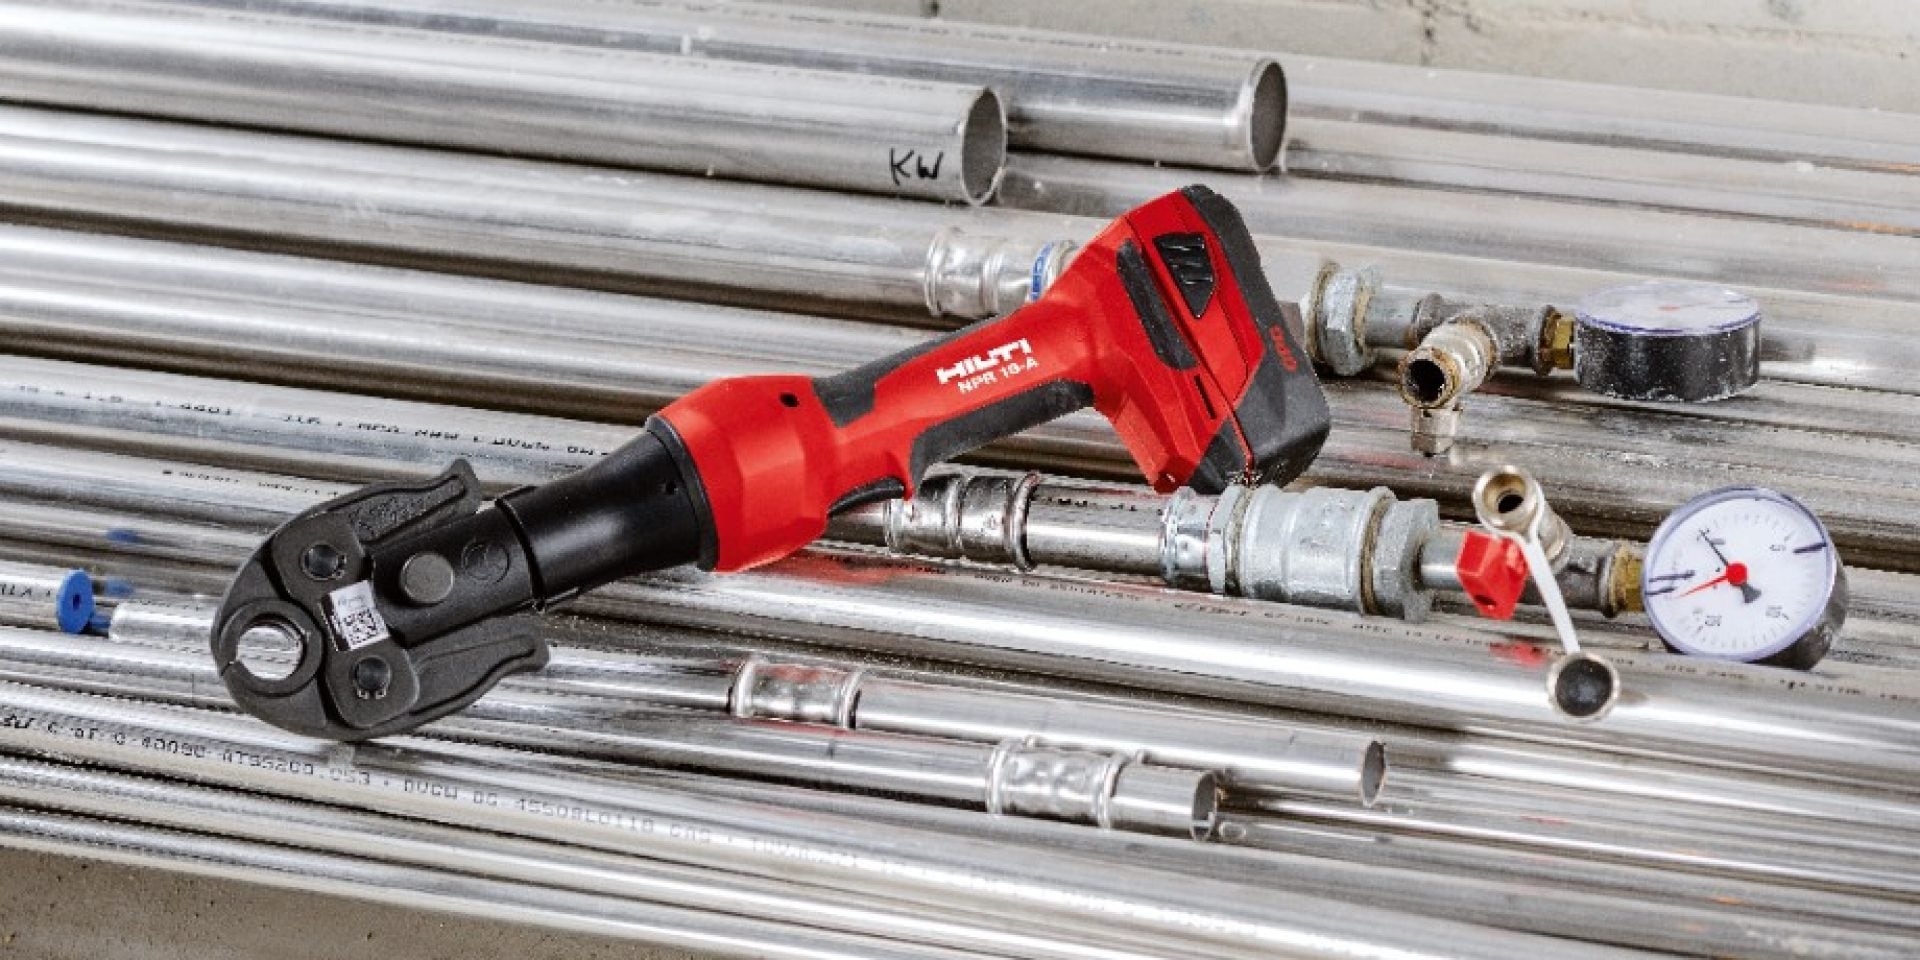 NPR 19-A cordless pipe press tool  with battery and pipes